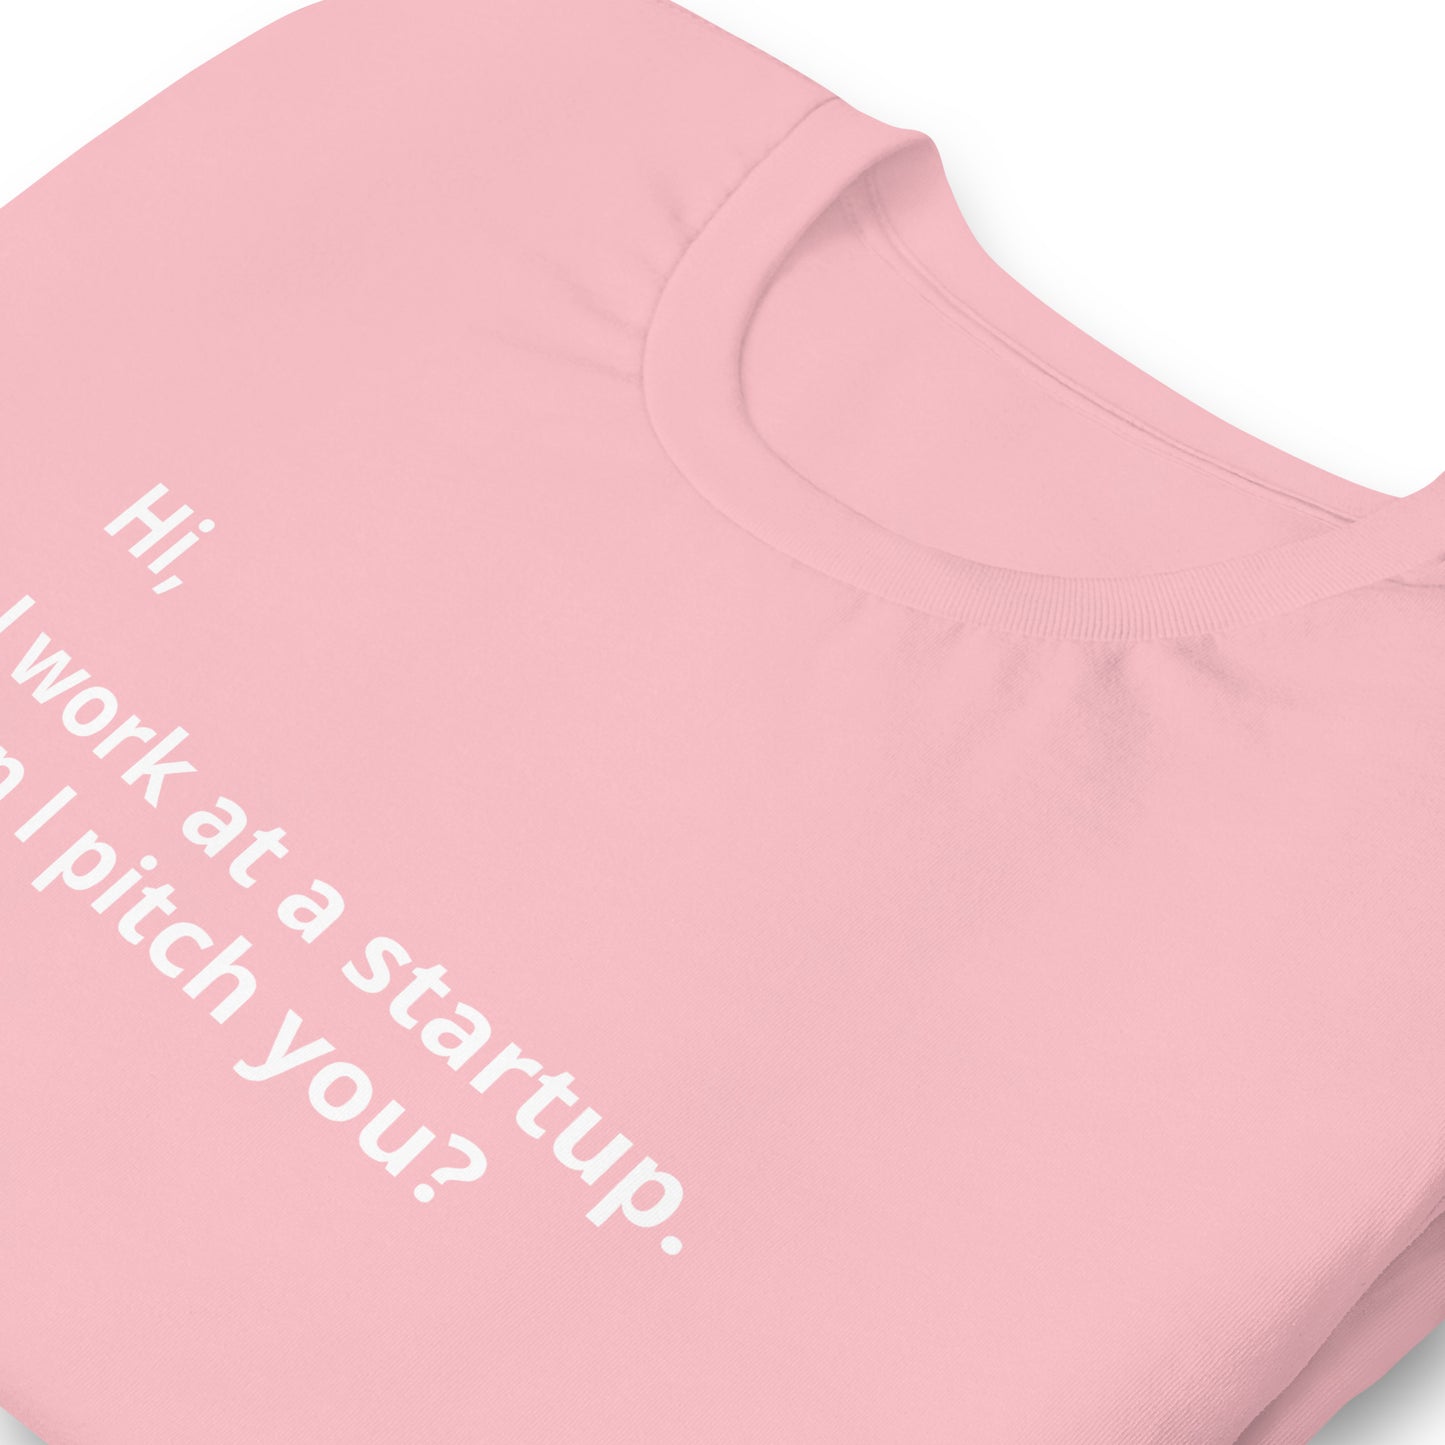 I Work At A Startup. Can I Pitch You? Unisex T-Shirt (Text On Both Sides Of Shirt)